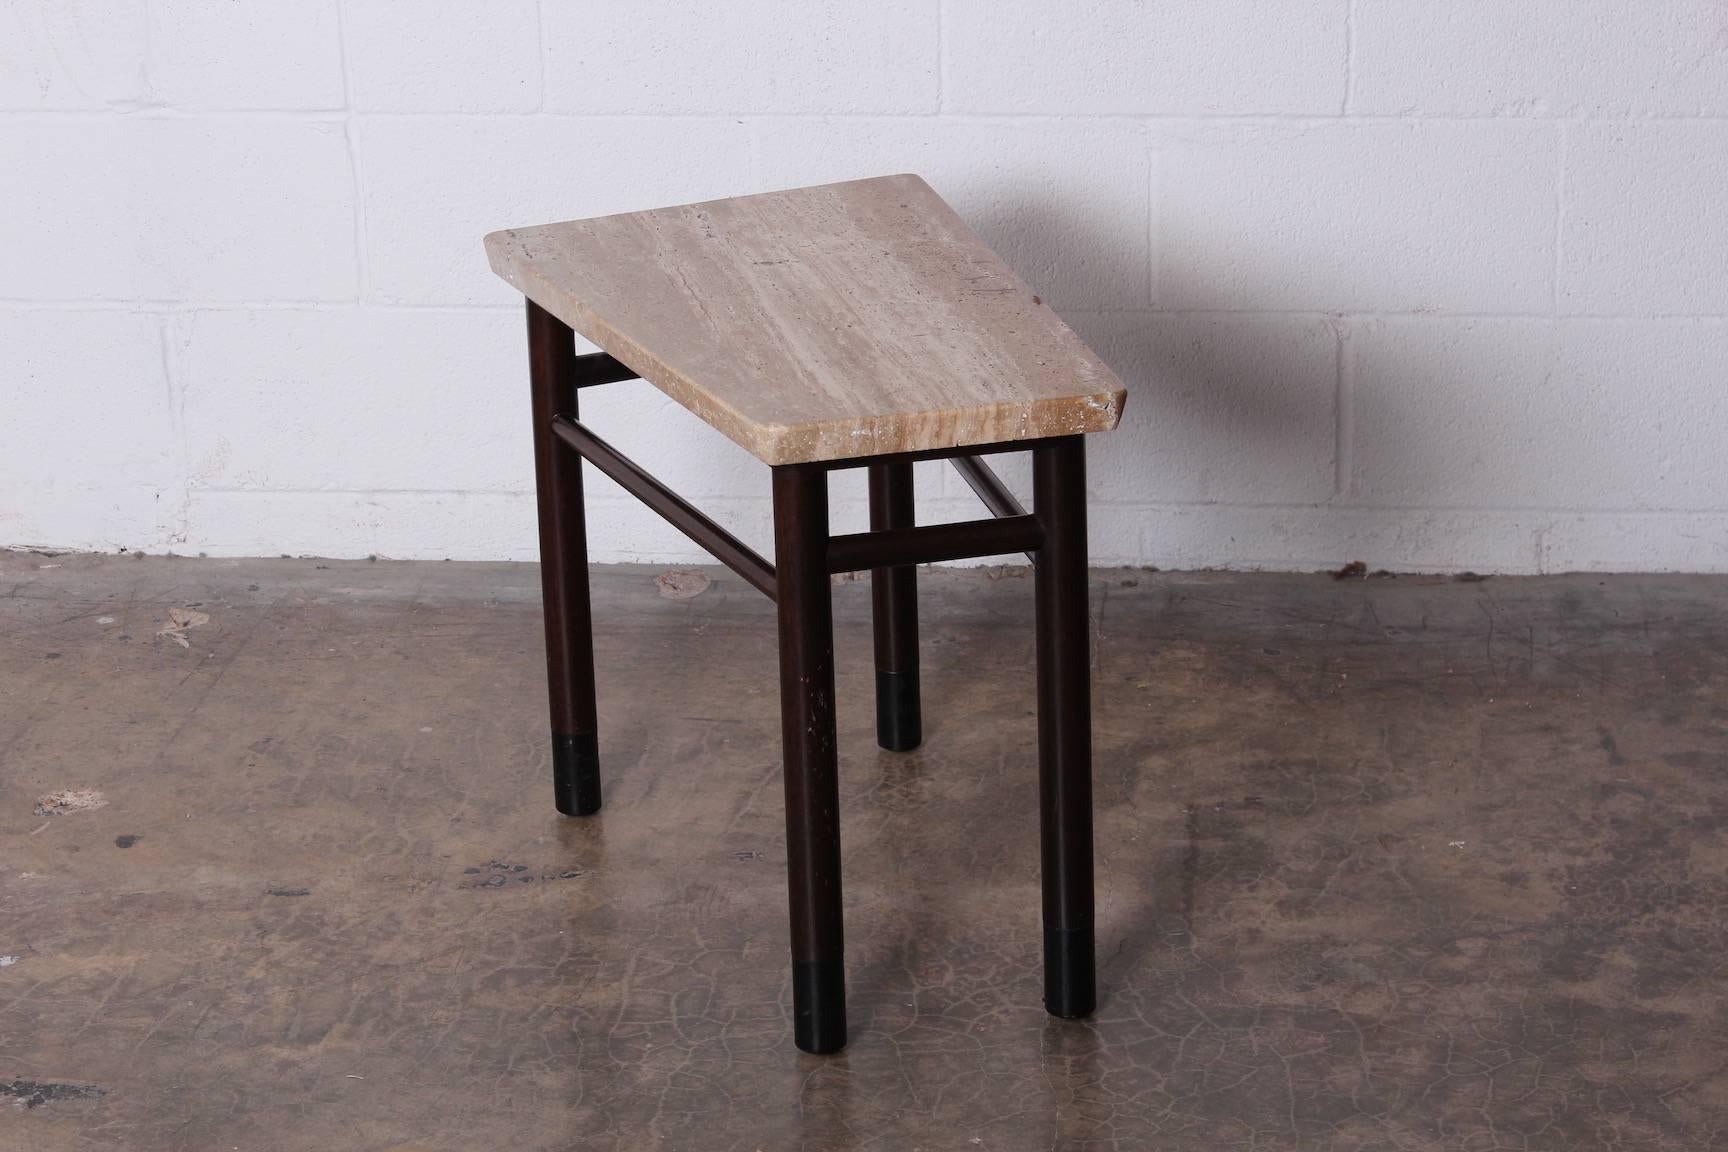 A wedge shaped table with leather wrapped legs and travertine top. Designed by Edward Wormley for Dunbar.